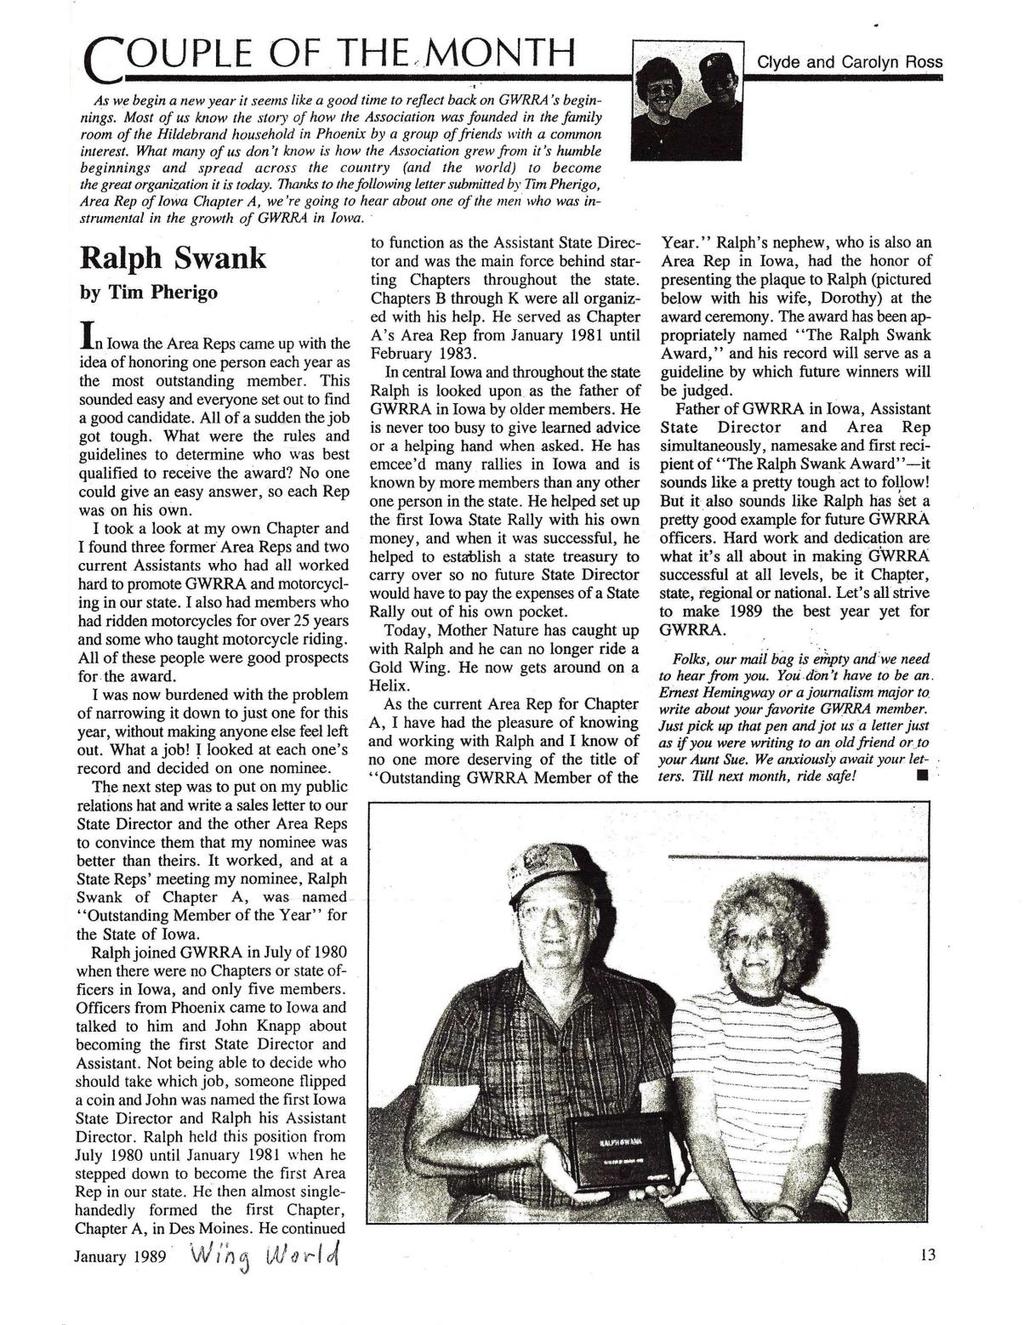 Article about Ralph Swank from the January 1989 issue of